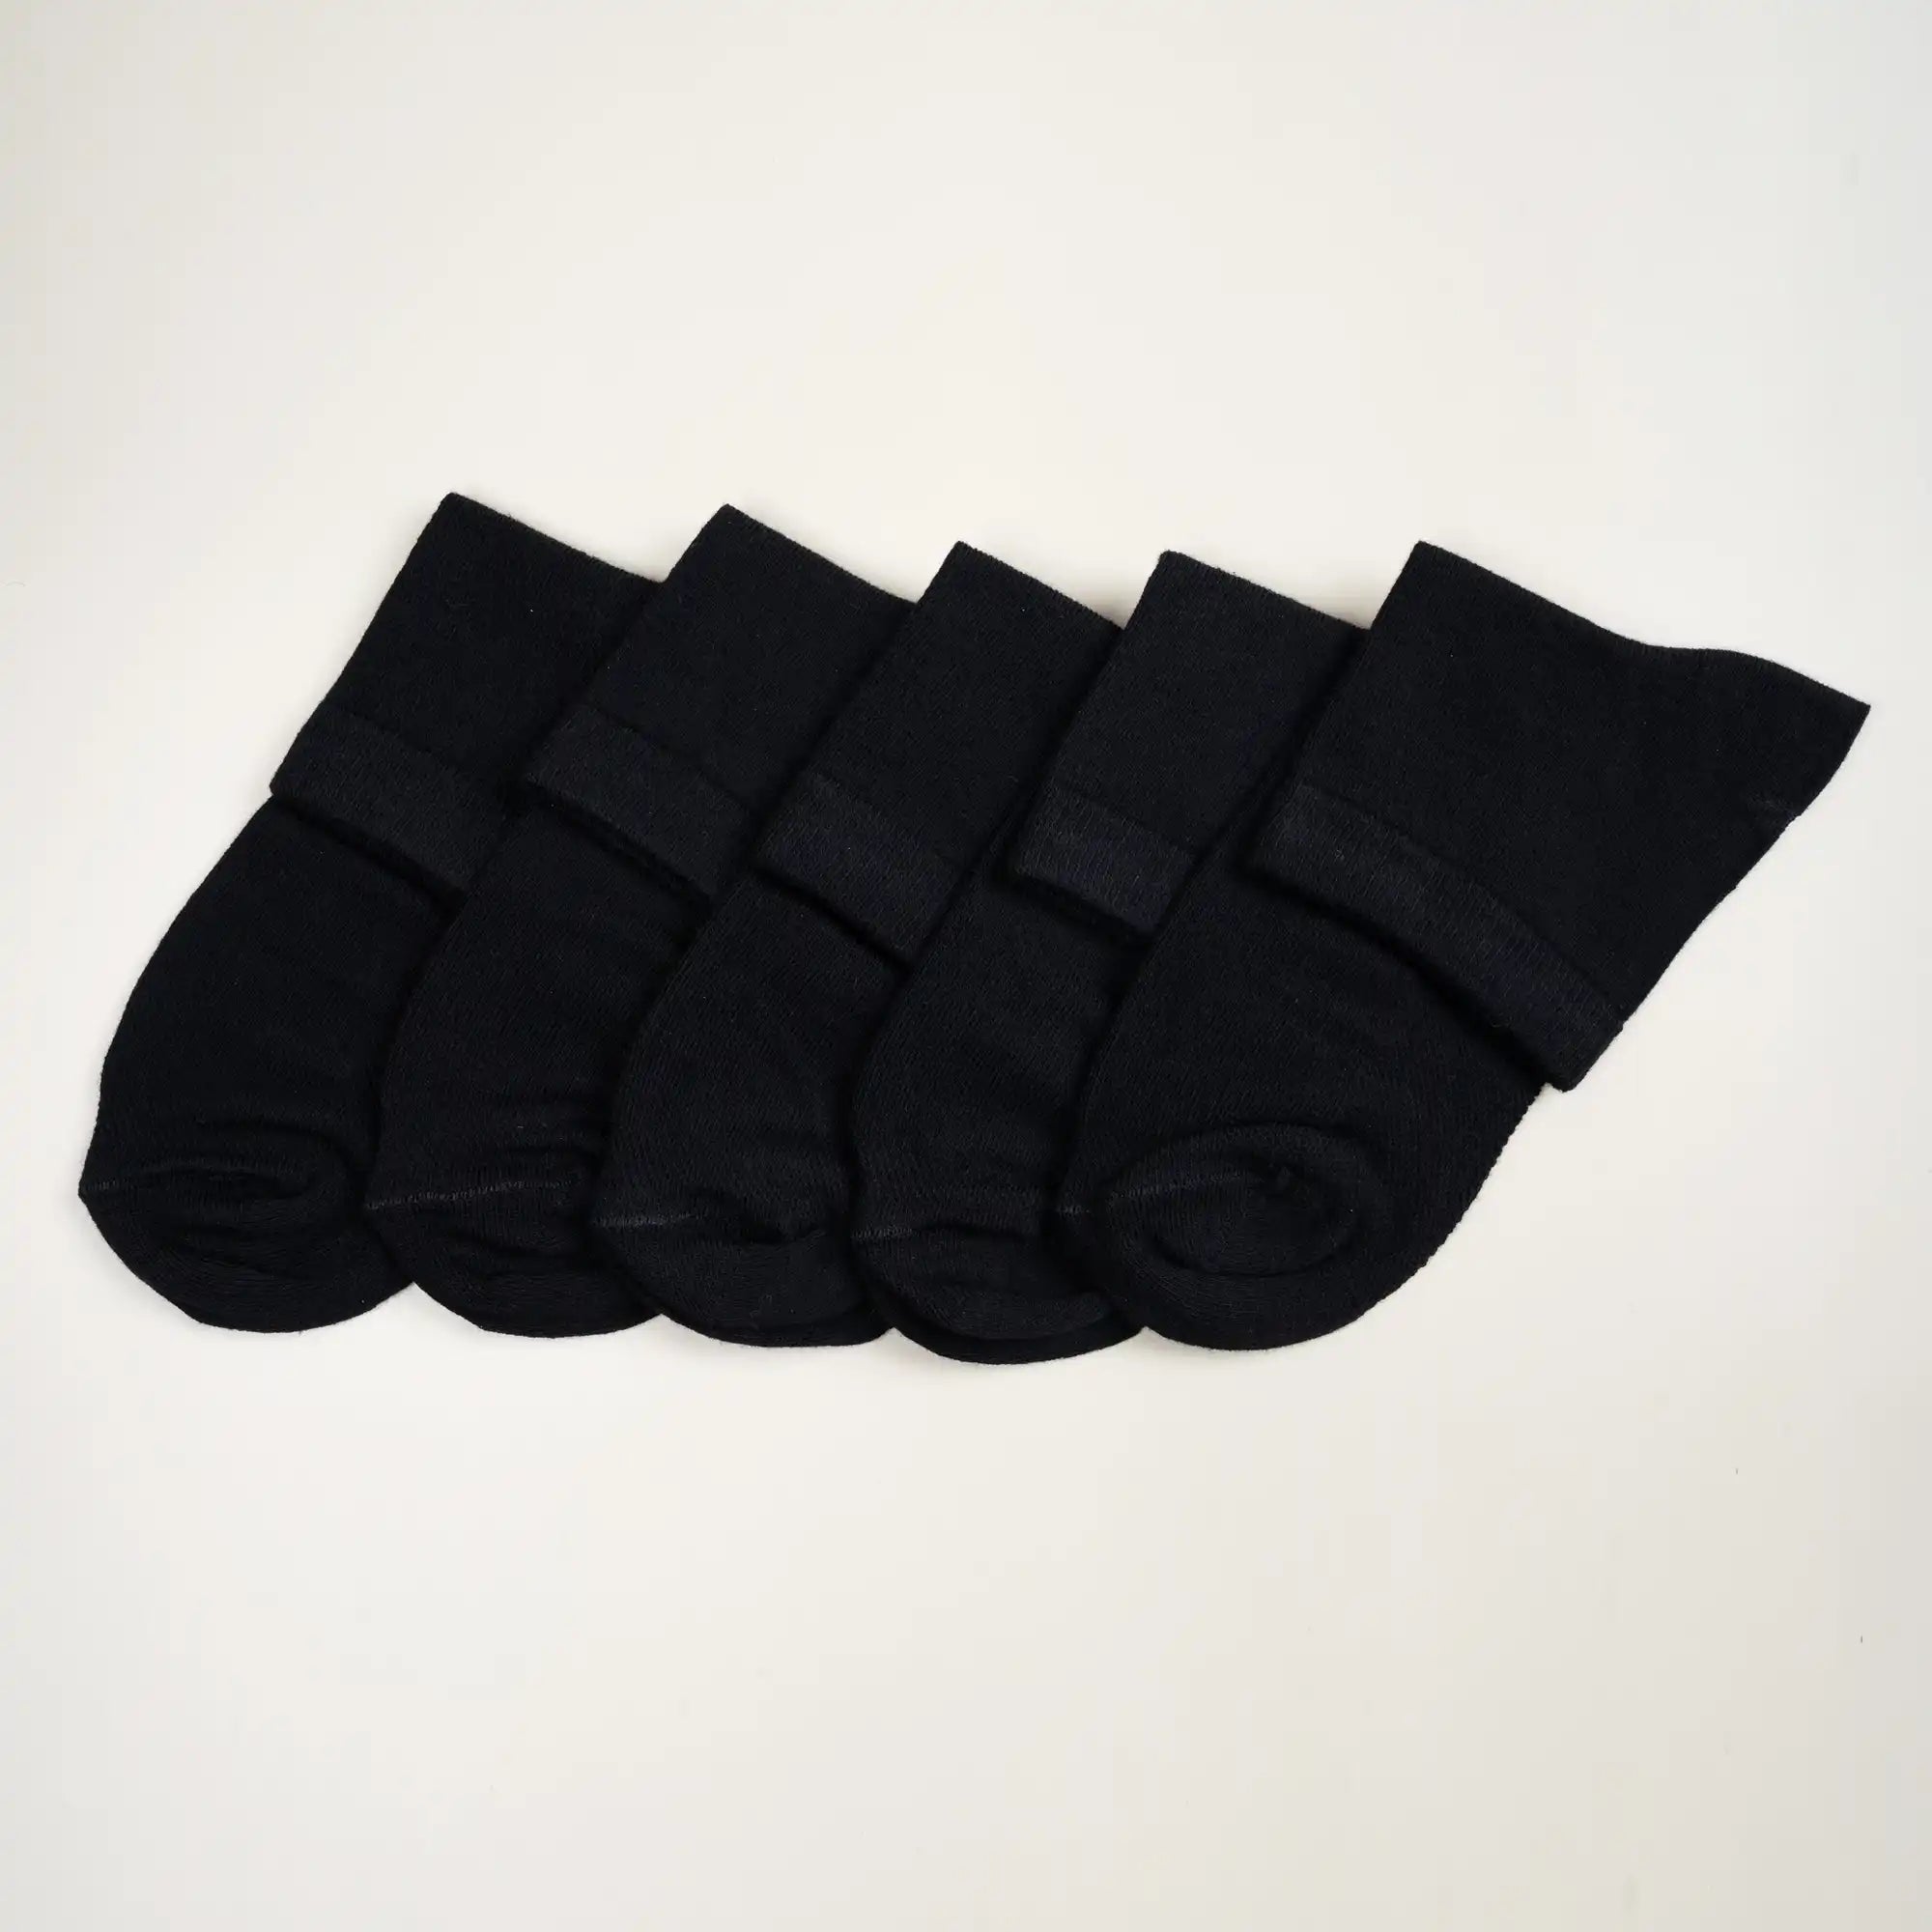 Young Wings Men's Black Colour Cotton Fabric Solid Ankle Length Socks - Pack of 5, Style no. M1-2143 N